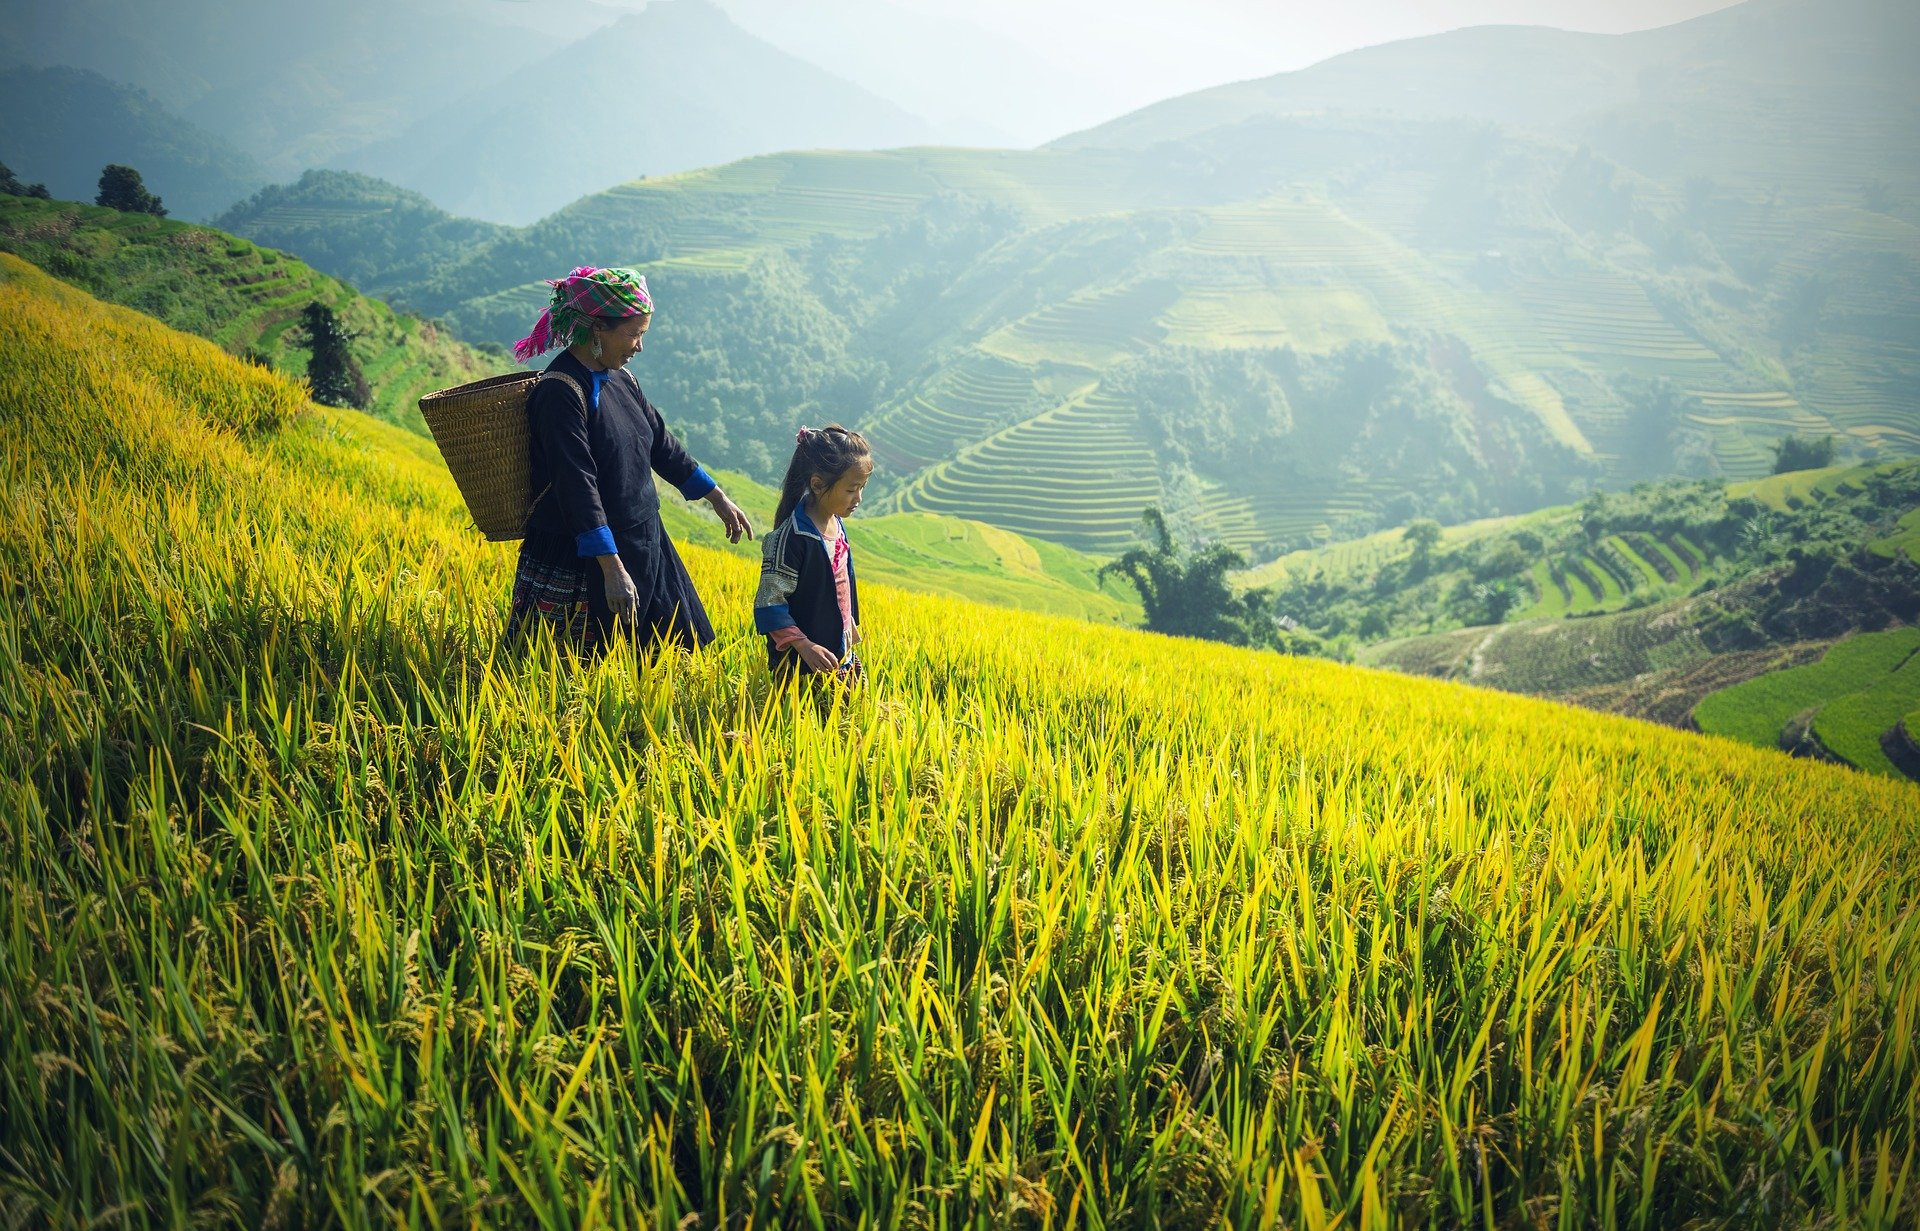 Asian woman in traditional dress with child in agriculture field